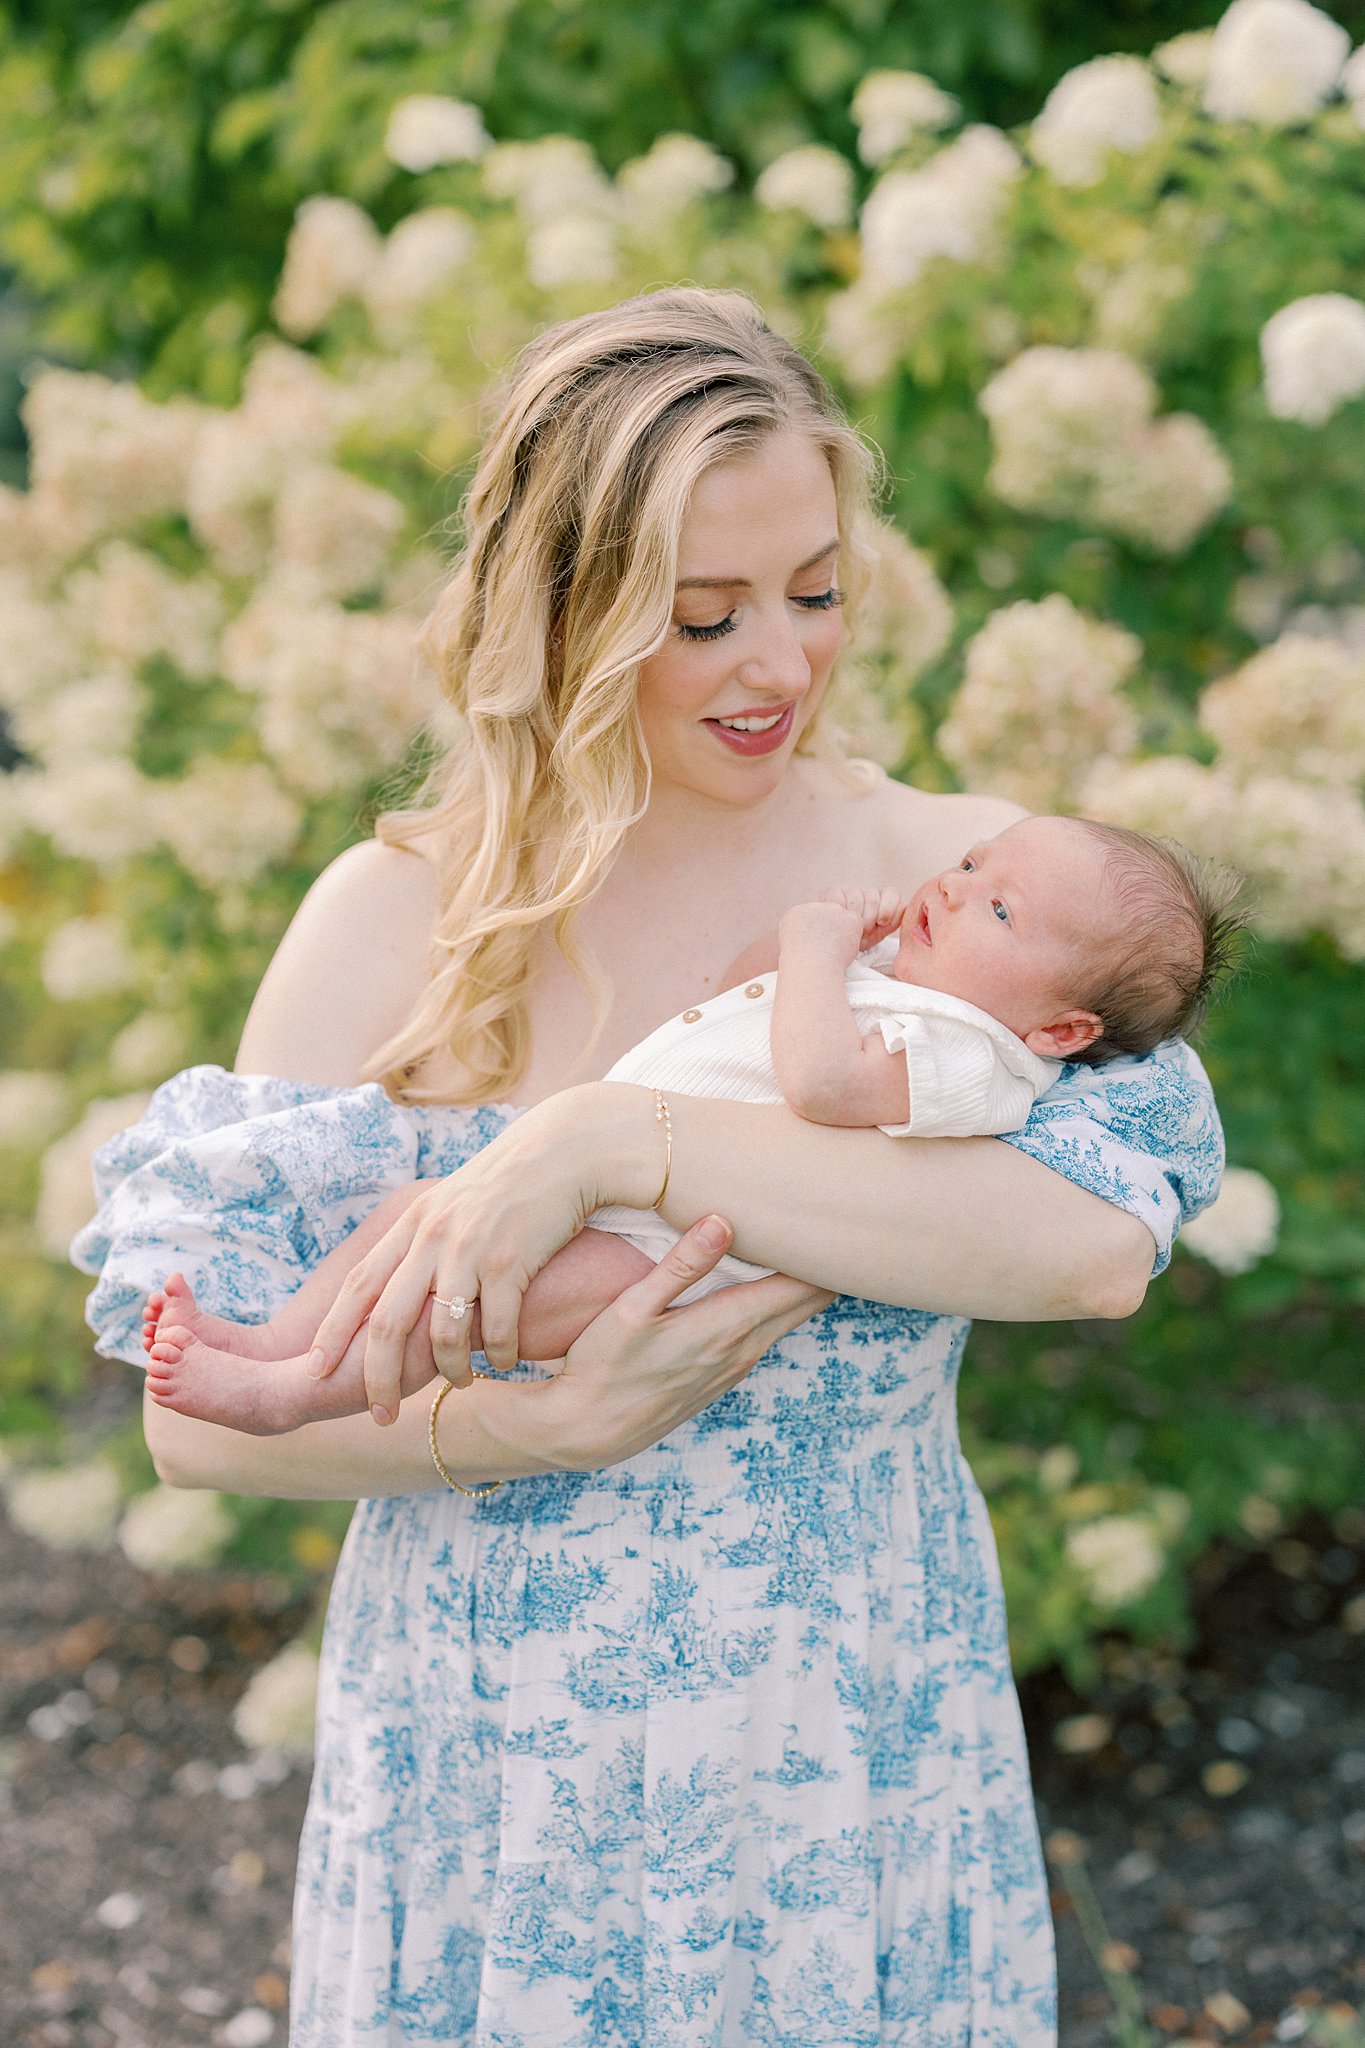 A happy mother in a blue dress stands in a garden holding her newborn baby in her arms in a white onesie thanks to a Fertility Clinic Indianapolis